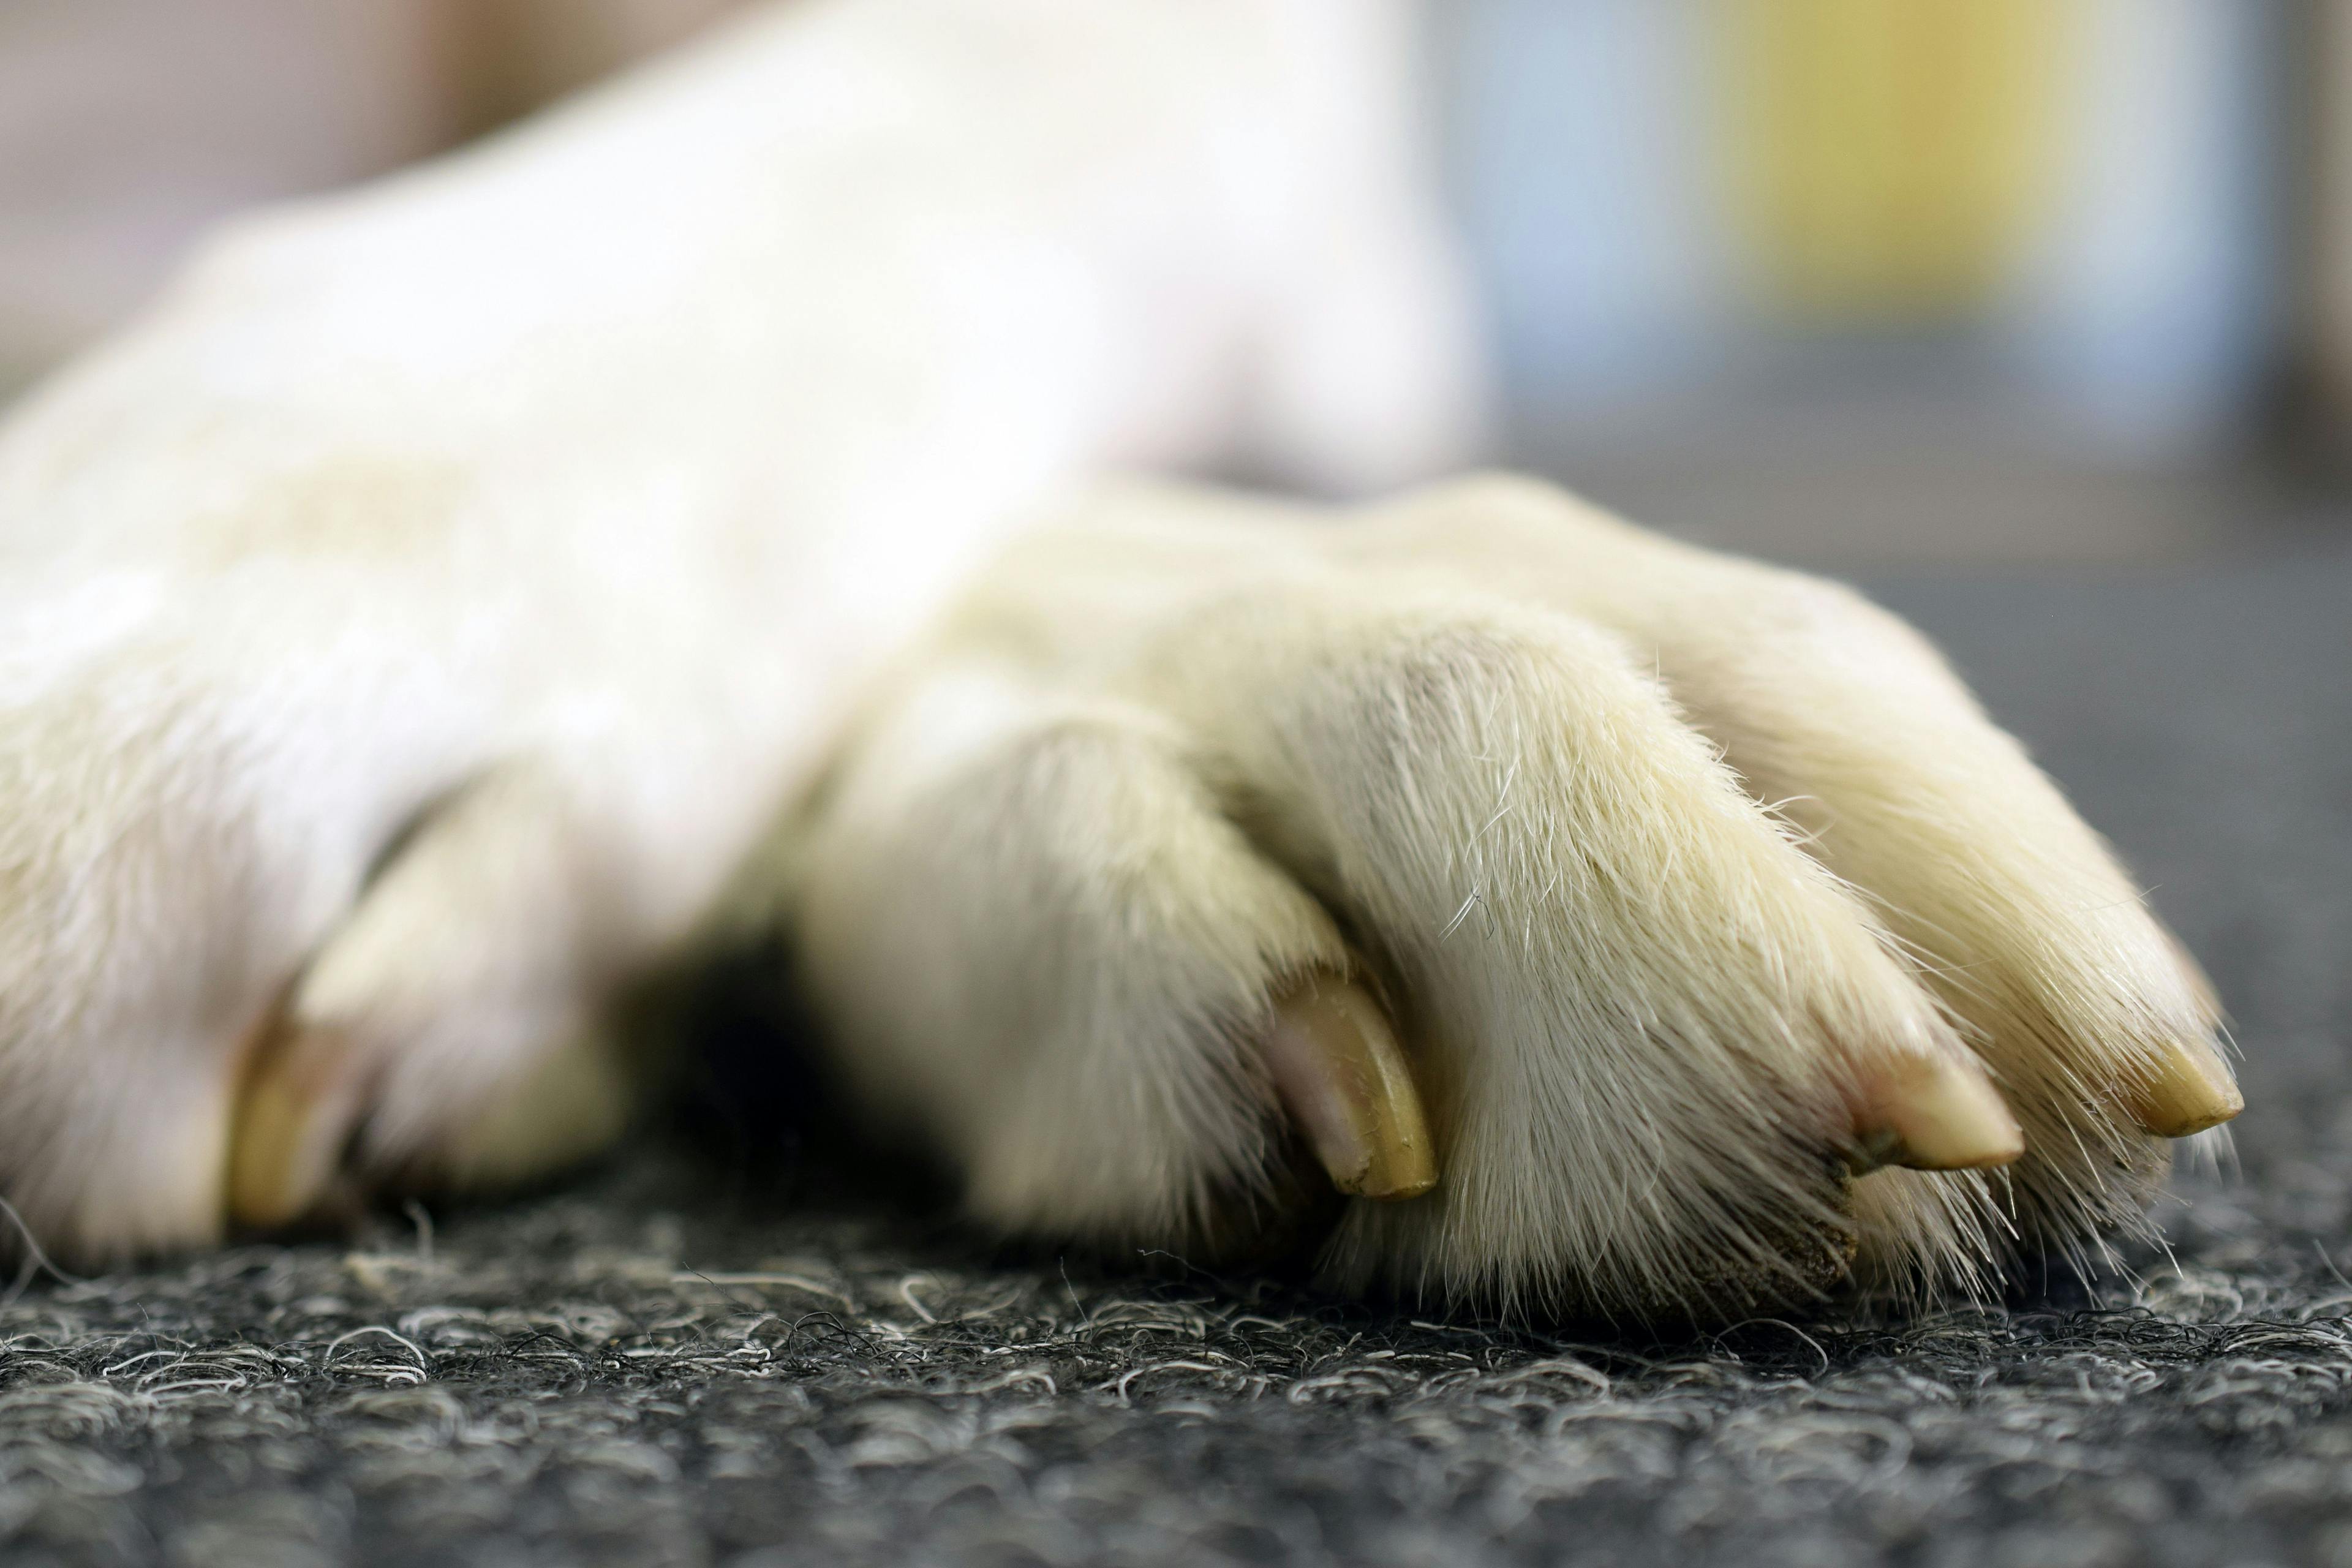 Tricky toes: Considerations regarding canine digit amputation